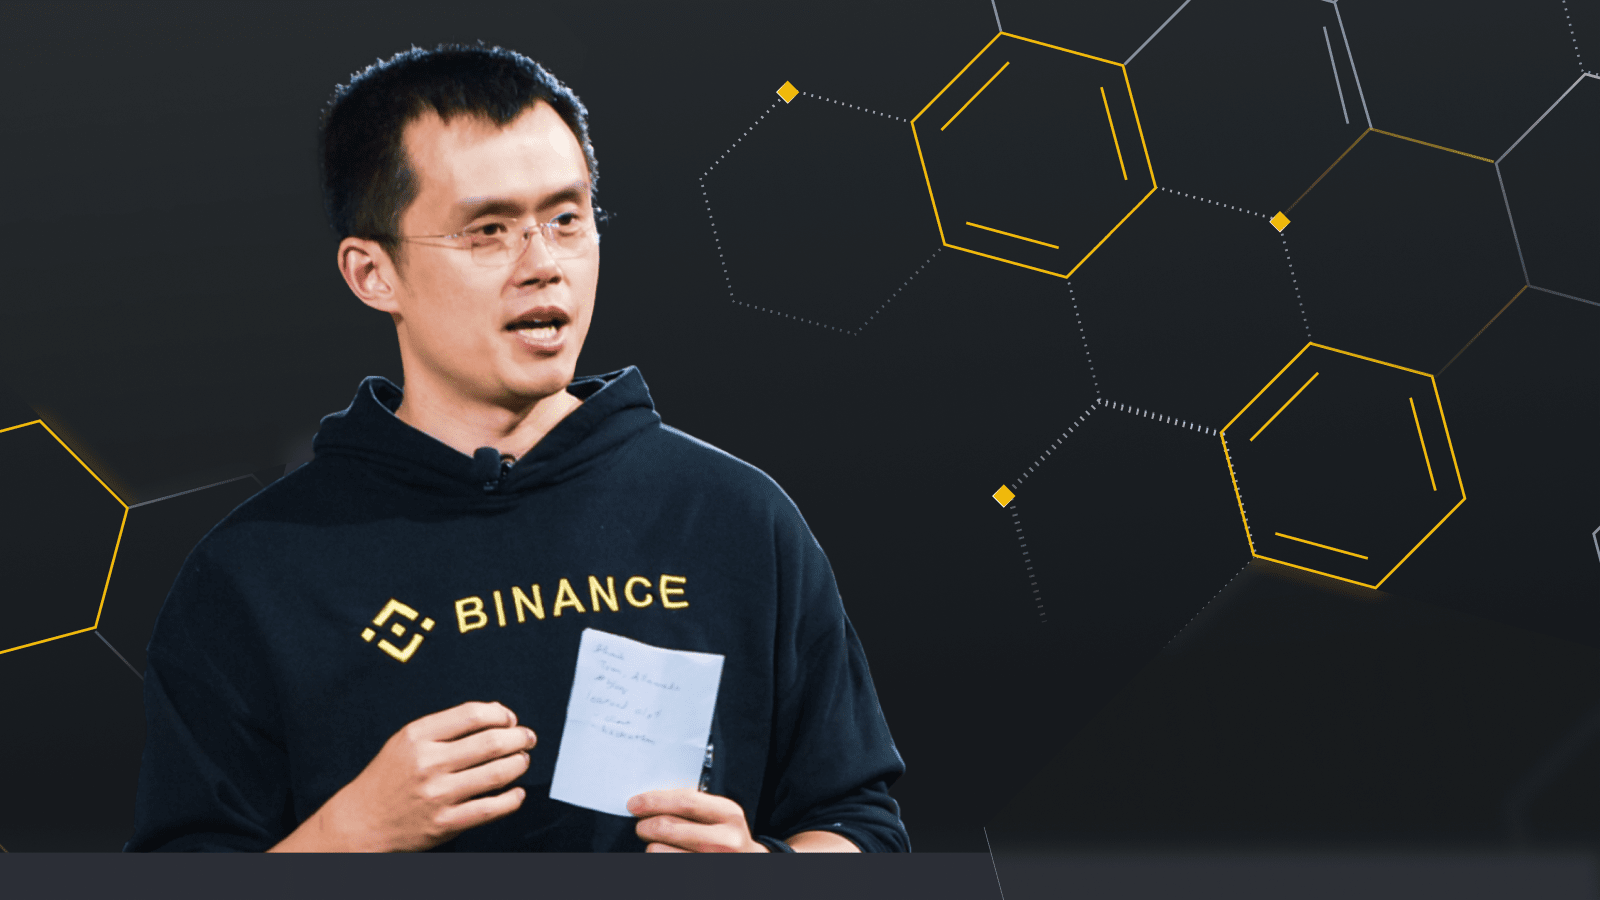 Binance Founder CZ’s Fortunes Plummet By $12 Billion Amidst Downturn in Crypto Trading